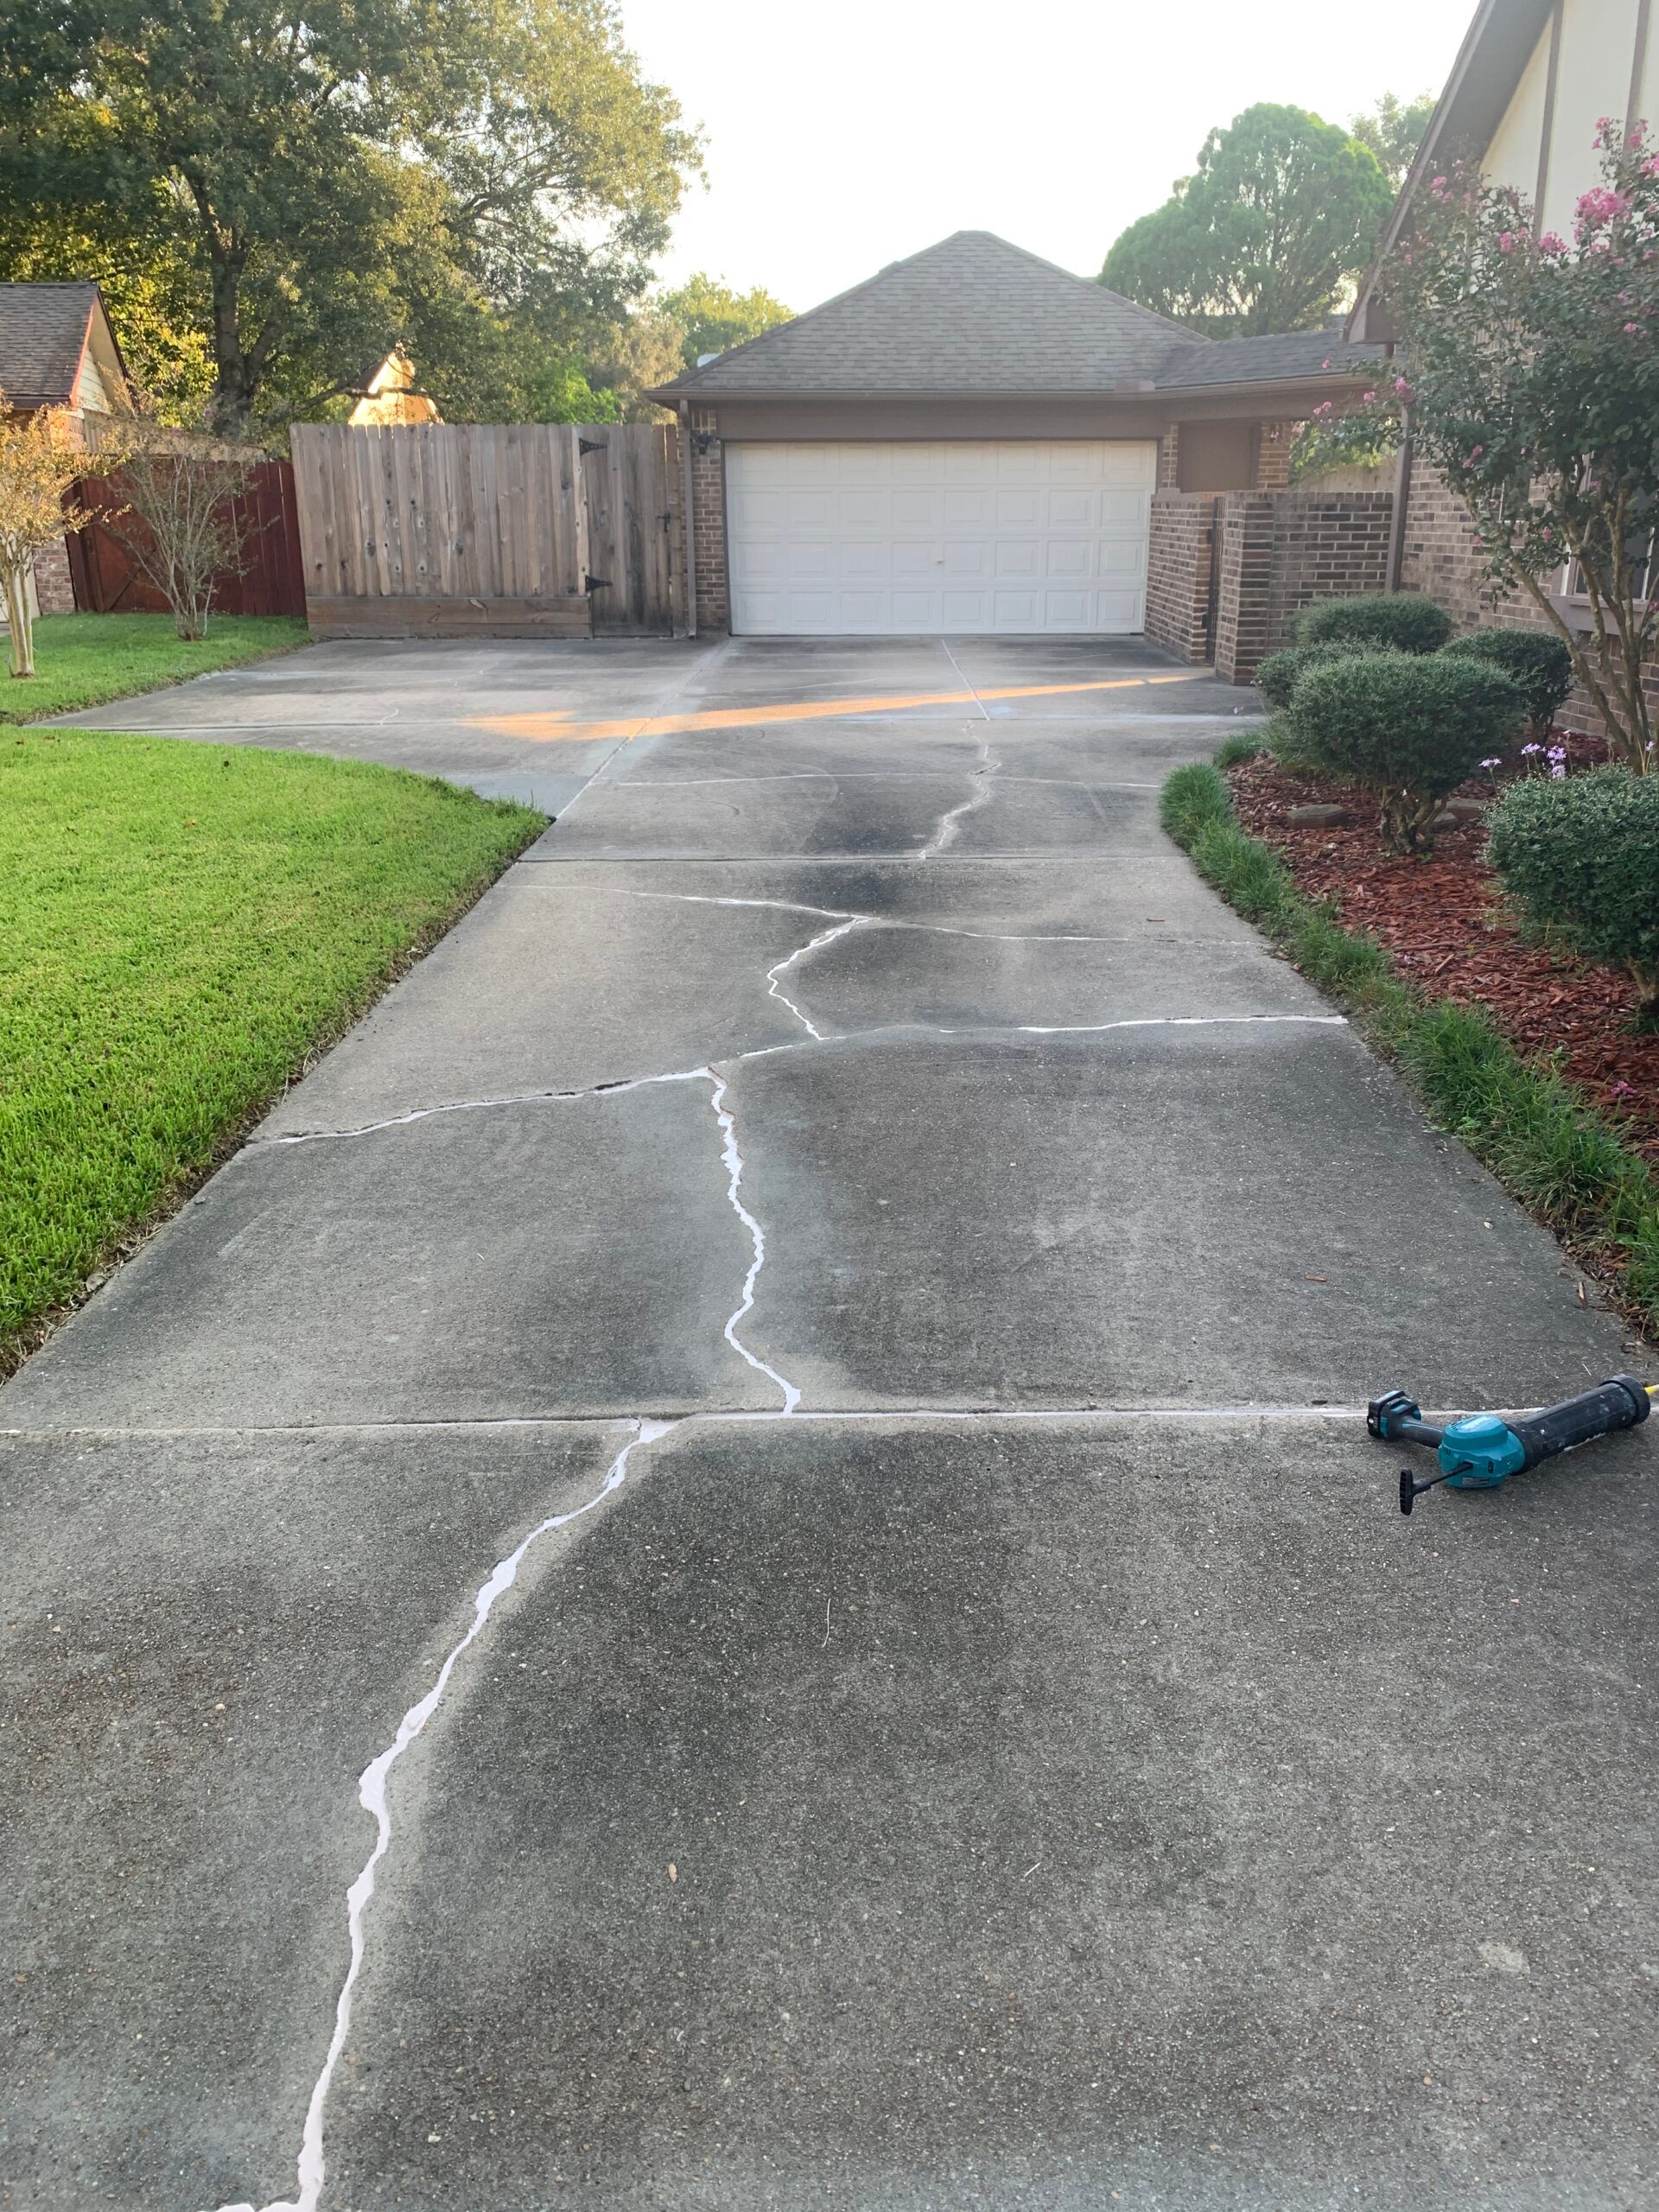 Driveway repair, Expansion joint sealing, Home maintenance, Sealant application, Concrete repair, Residential suburb, Power tool, Property upkeep